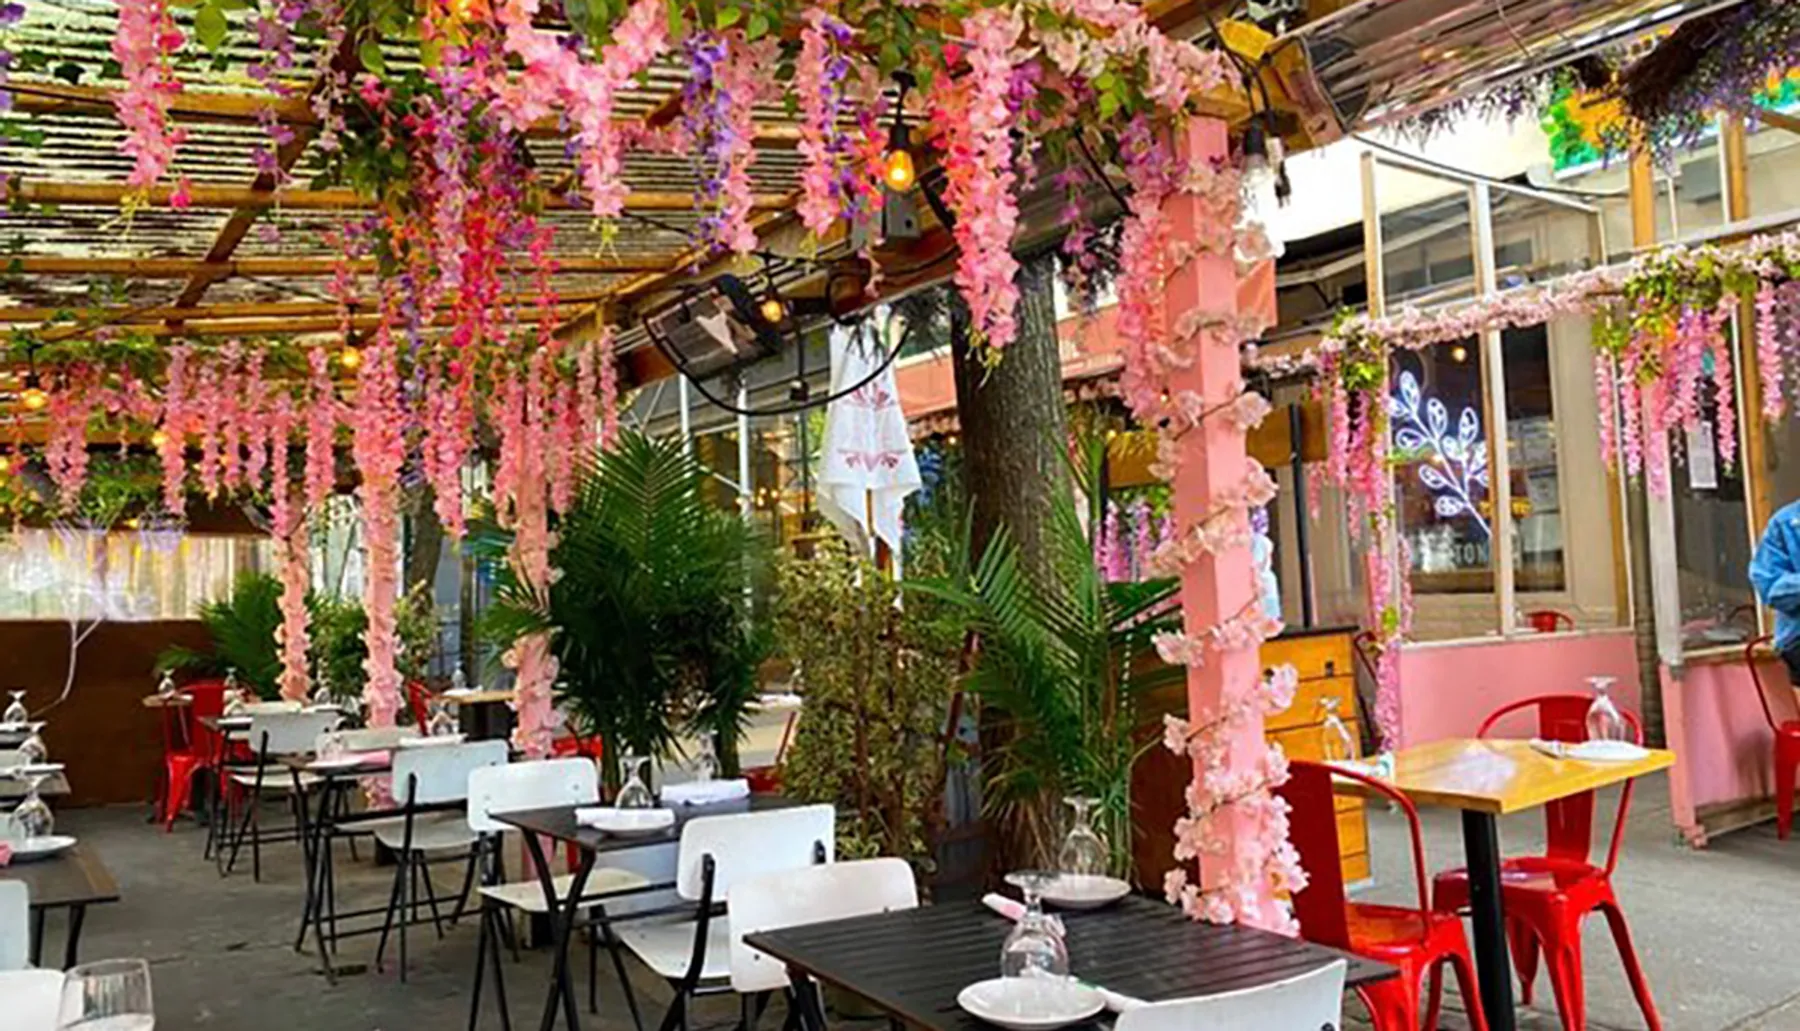 The image shows an outdoor restaurant patio adorned with pink artificial flowers, providing a colorful and inviting ambiance for dining.